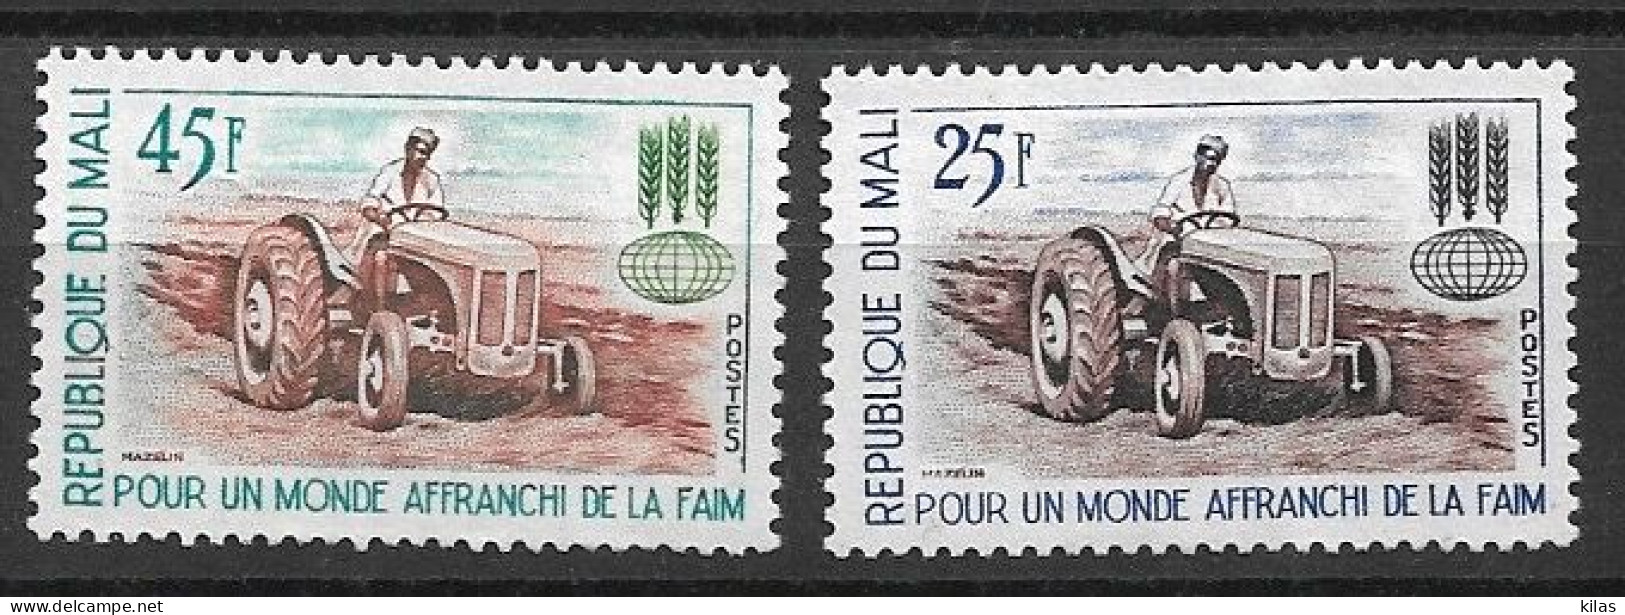 MALI 1963 FREEDOM FROM HUNGER MNH - Alimentación